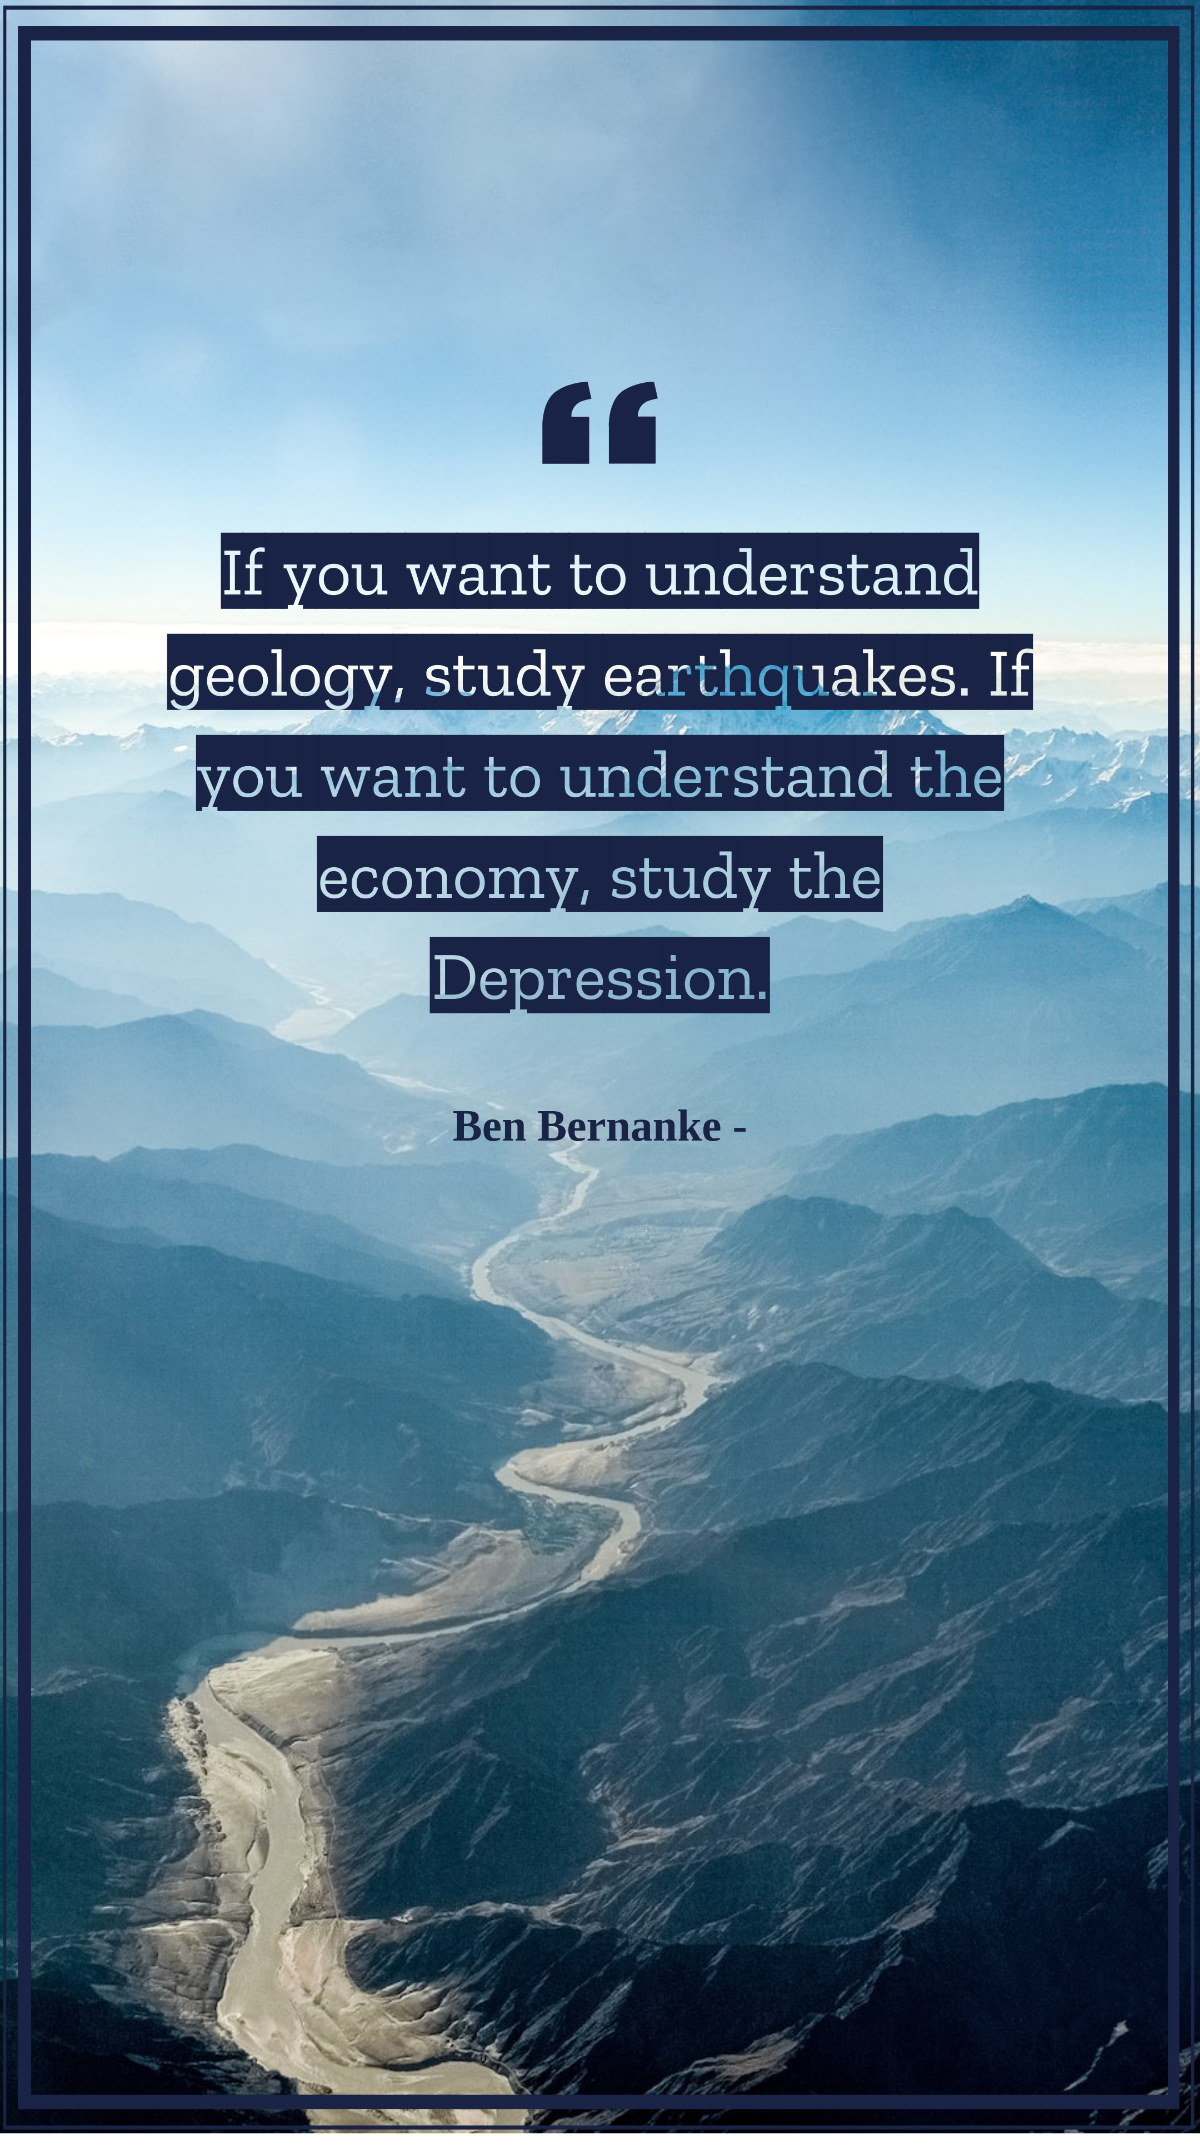 Ben Bernanke - If you want to understand geology, study earthquakes. If you want to understand the economy, study the Depression. Template